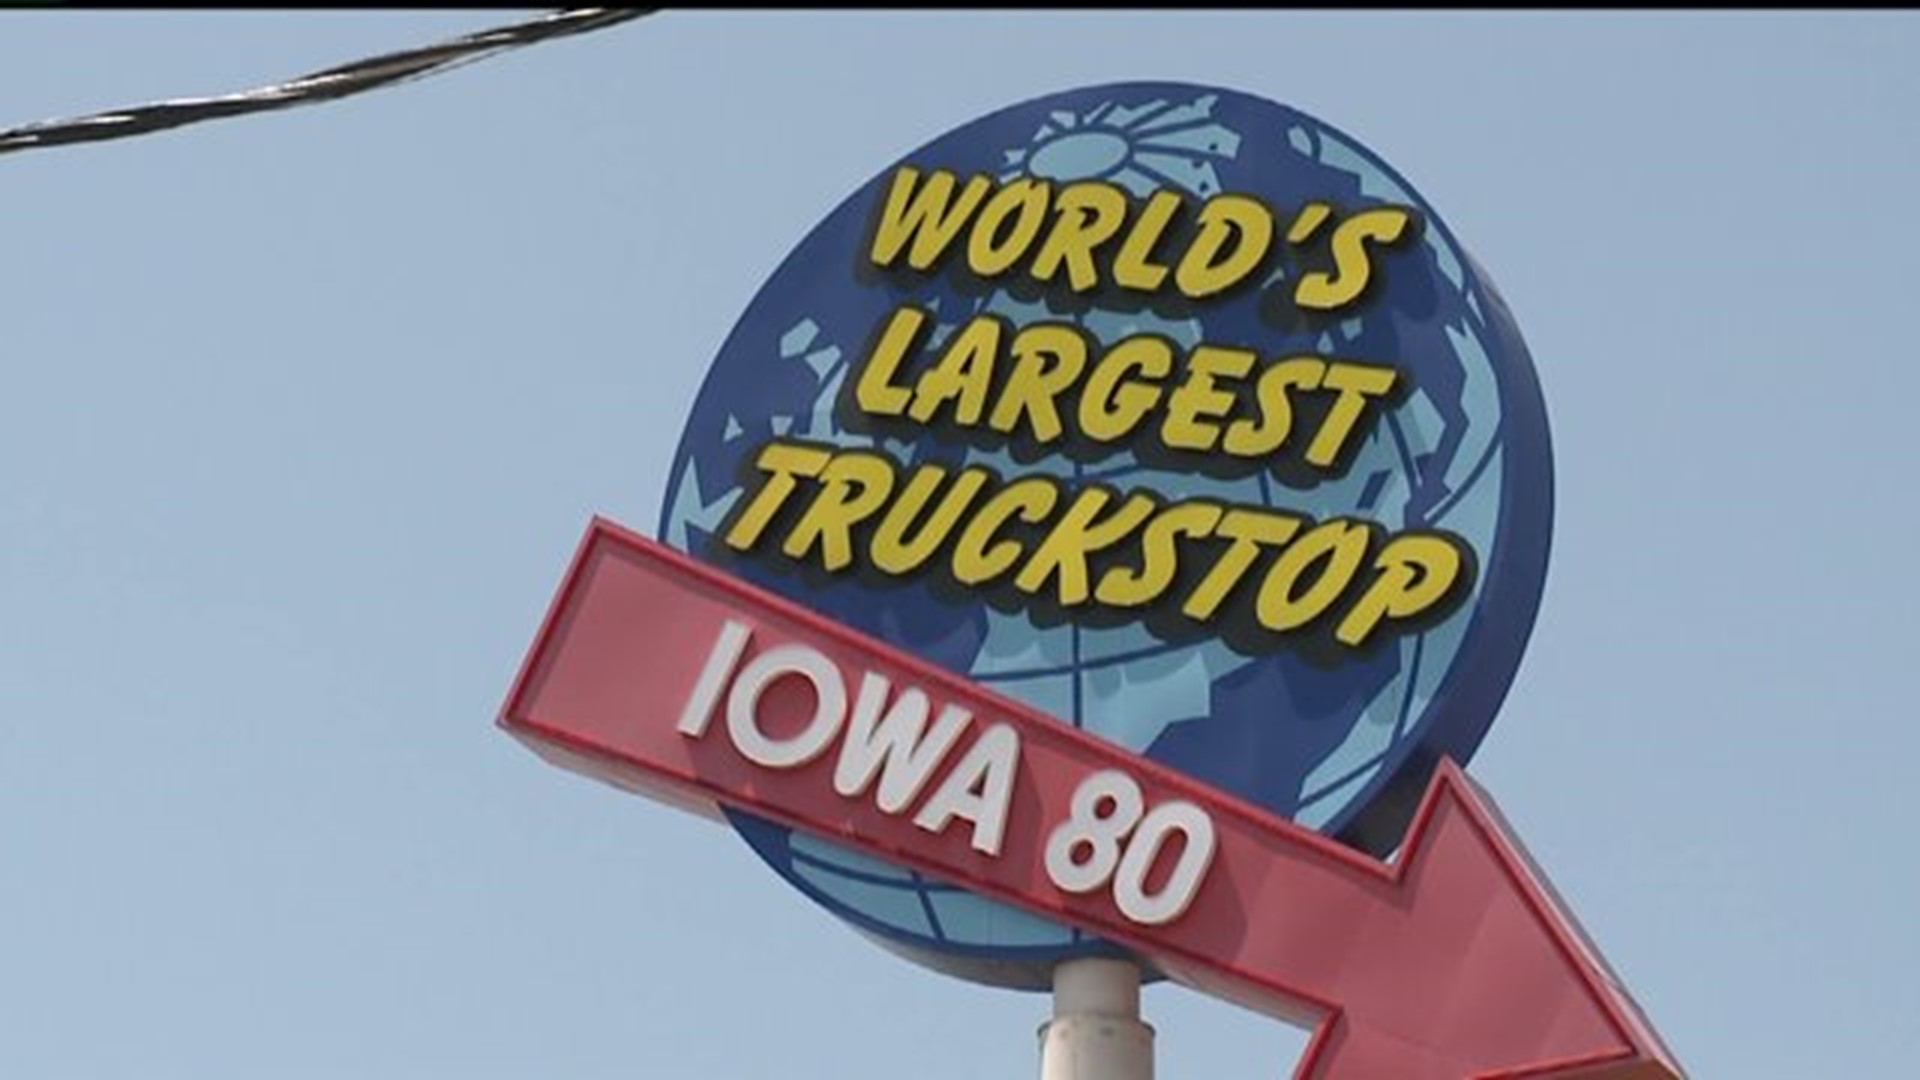 Iowa 80 truck stop one of top 15 "quirky" places to visit